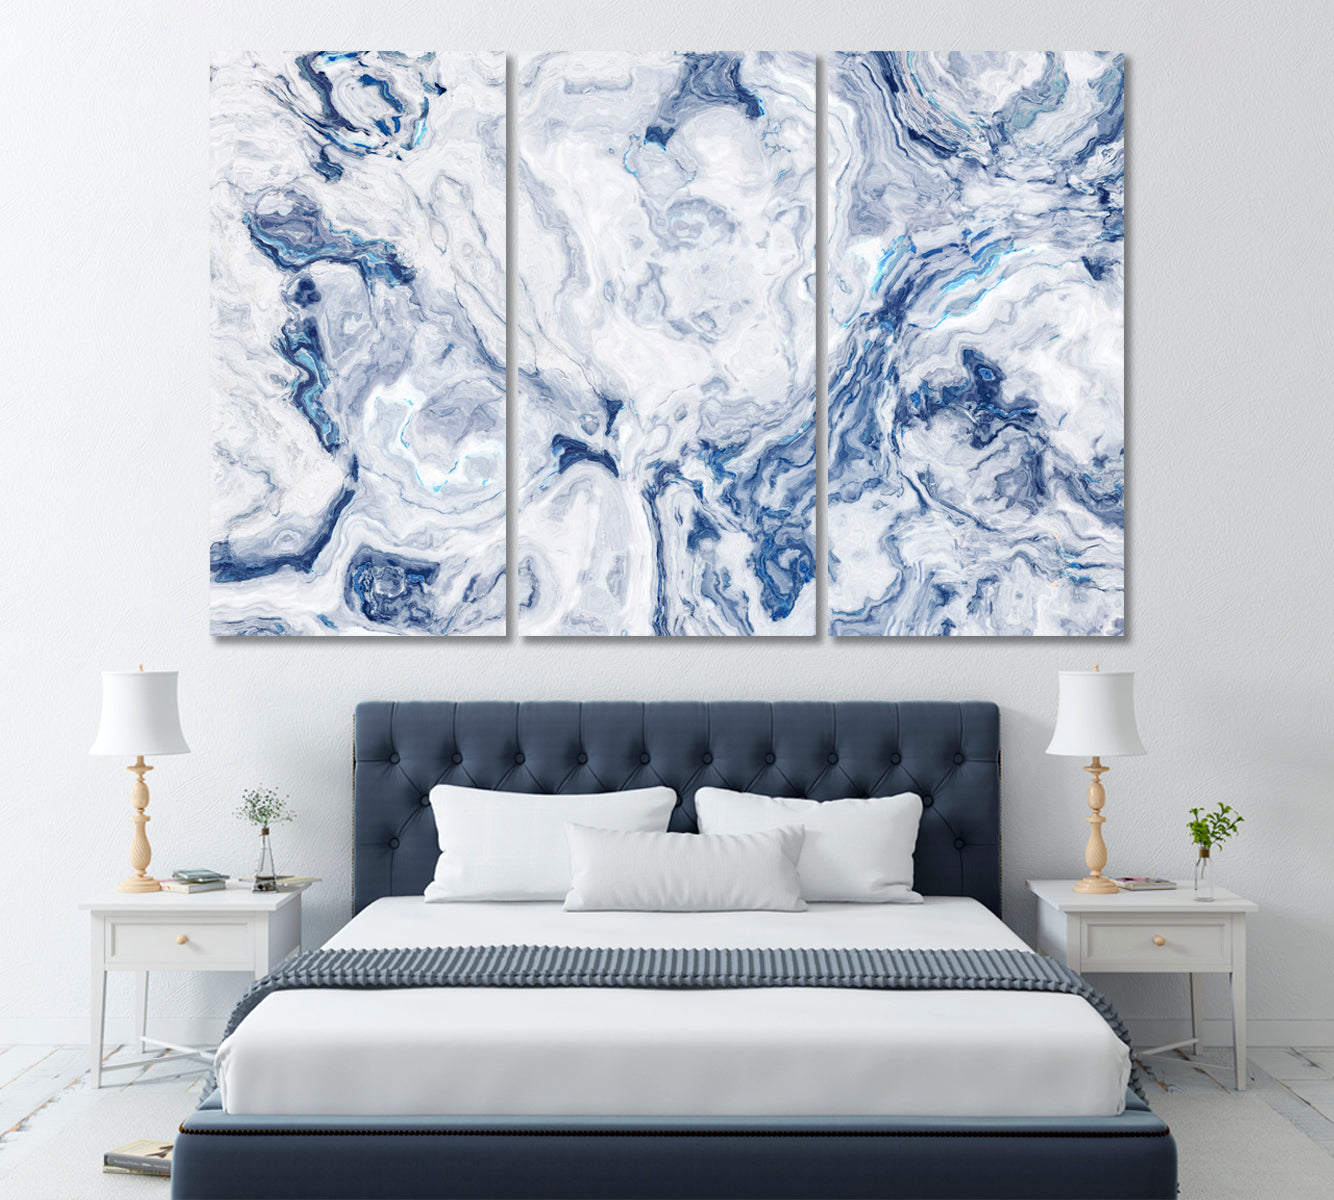 White Marble with Blue Veins Canvas Print ArtLexy 3 Panels 36"x24" inches 